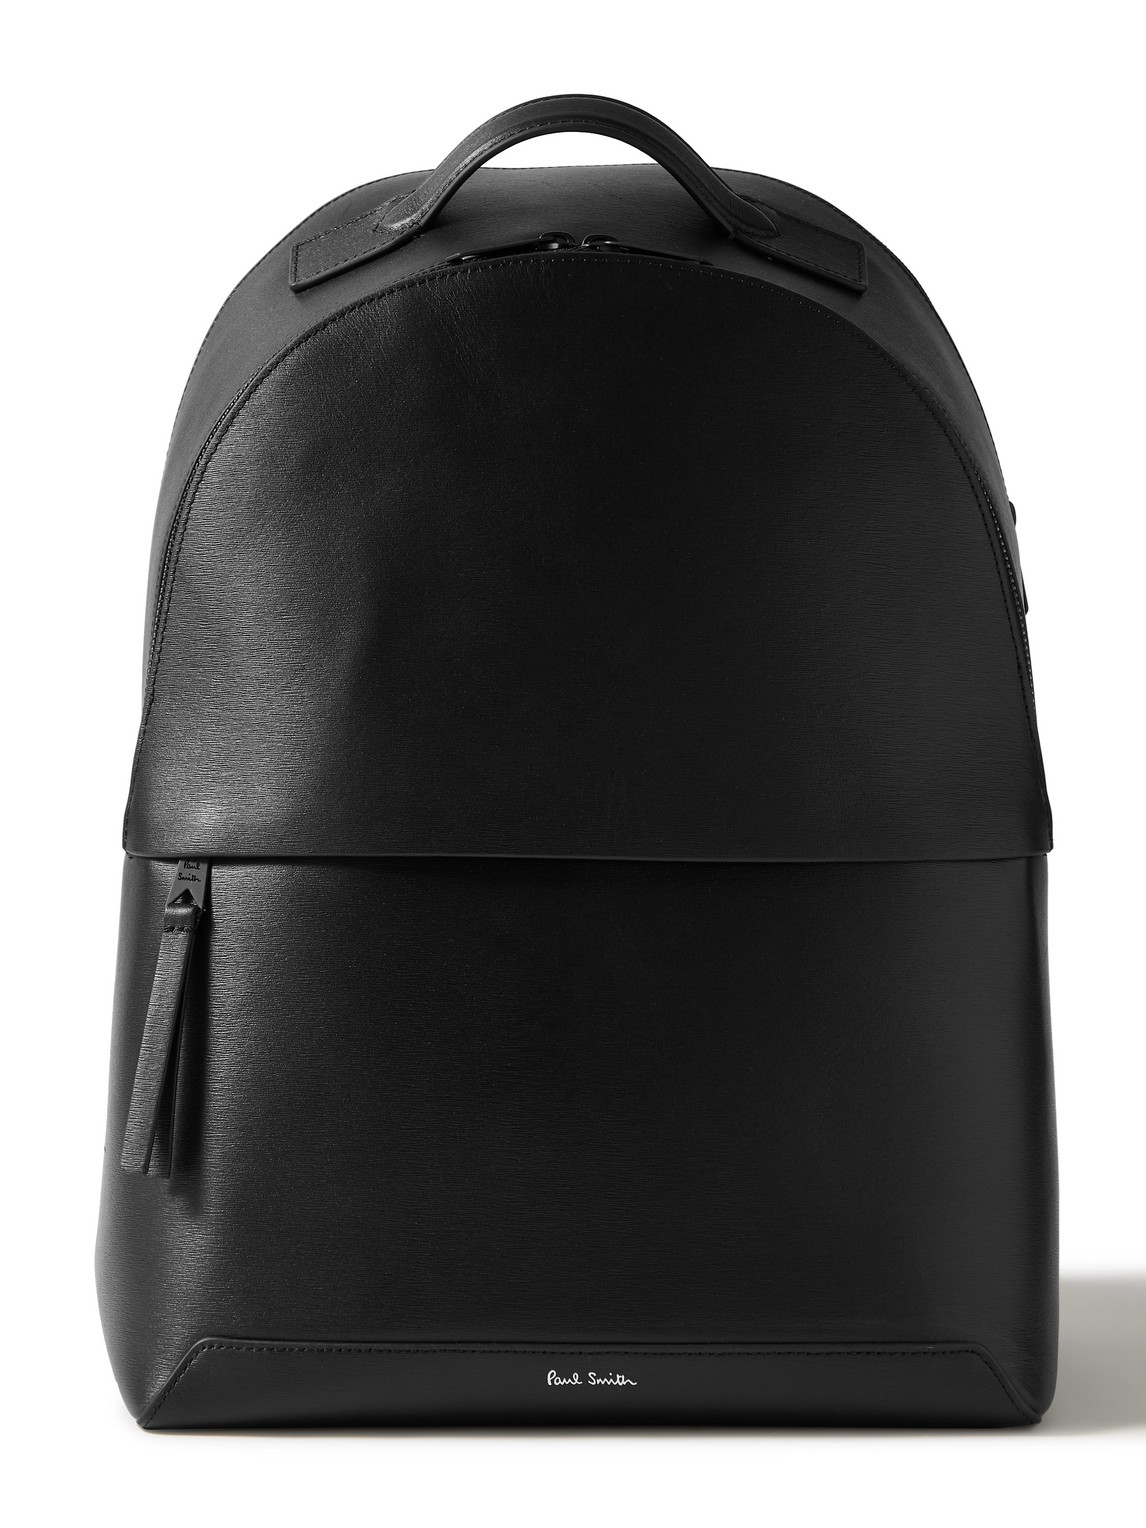 Paul Smith - Logo-Jacquard Webbing-Trimmed Textured-Leather Backpack - Men - Black von Paul Smith